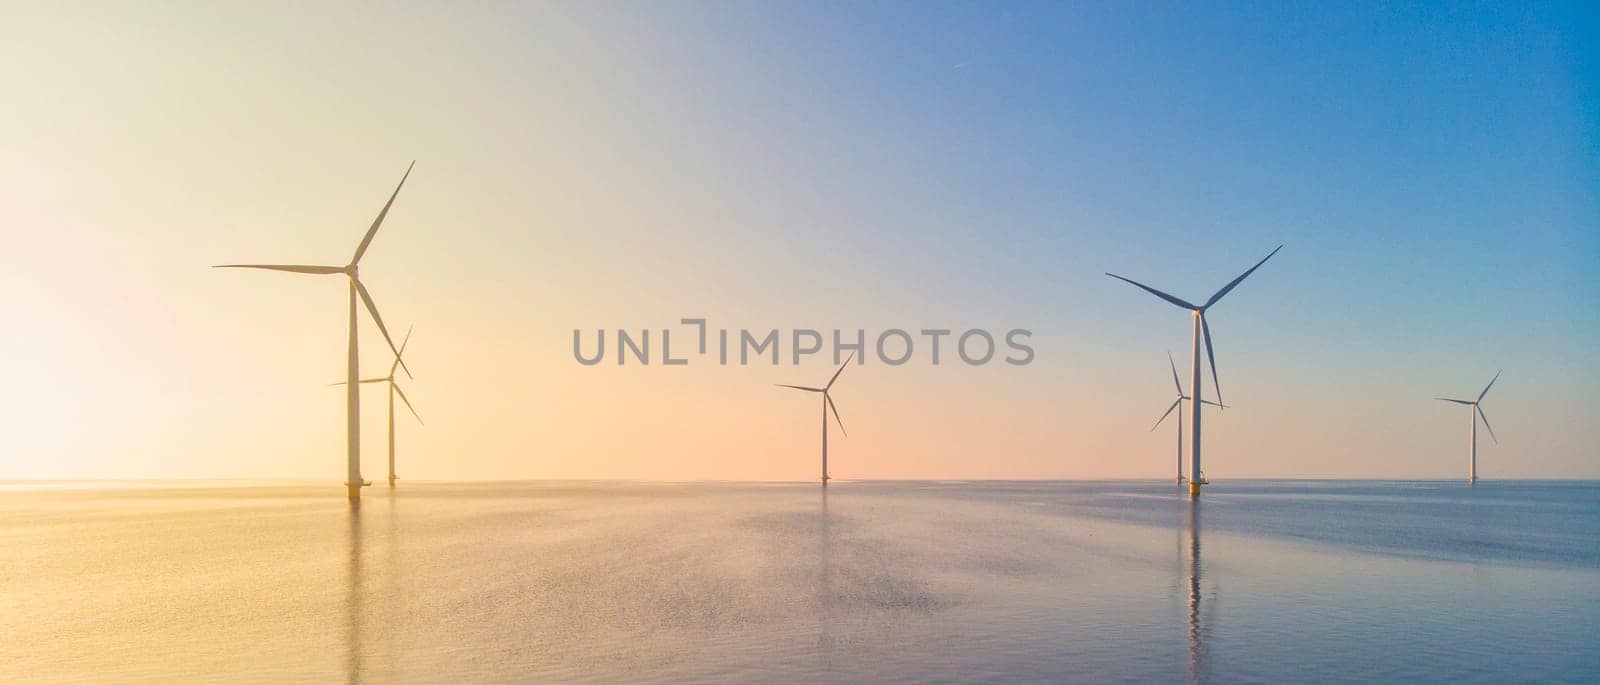 Windmill park in the ocean, drone aerial view of windmill turbines generating green energy, windmills isolated at sea in the Netherlands at sunset